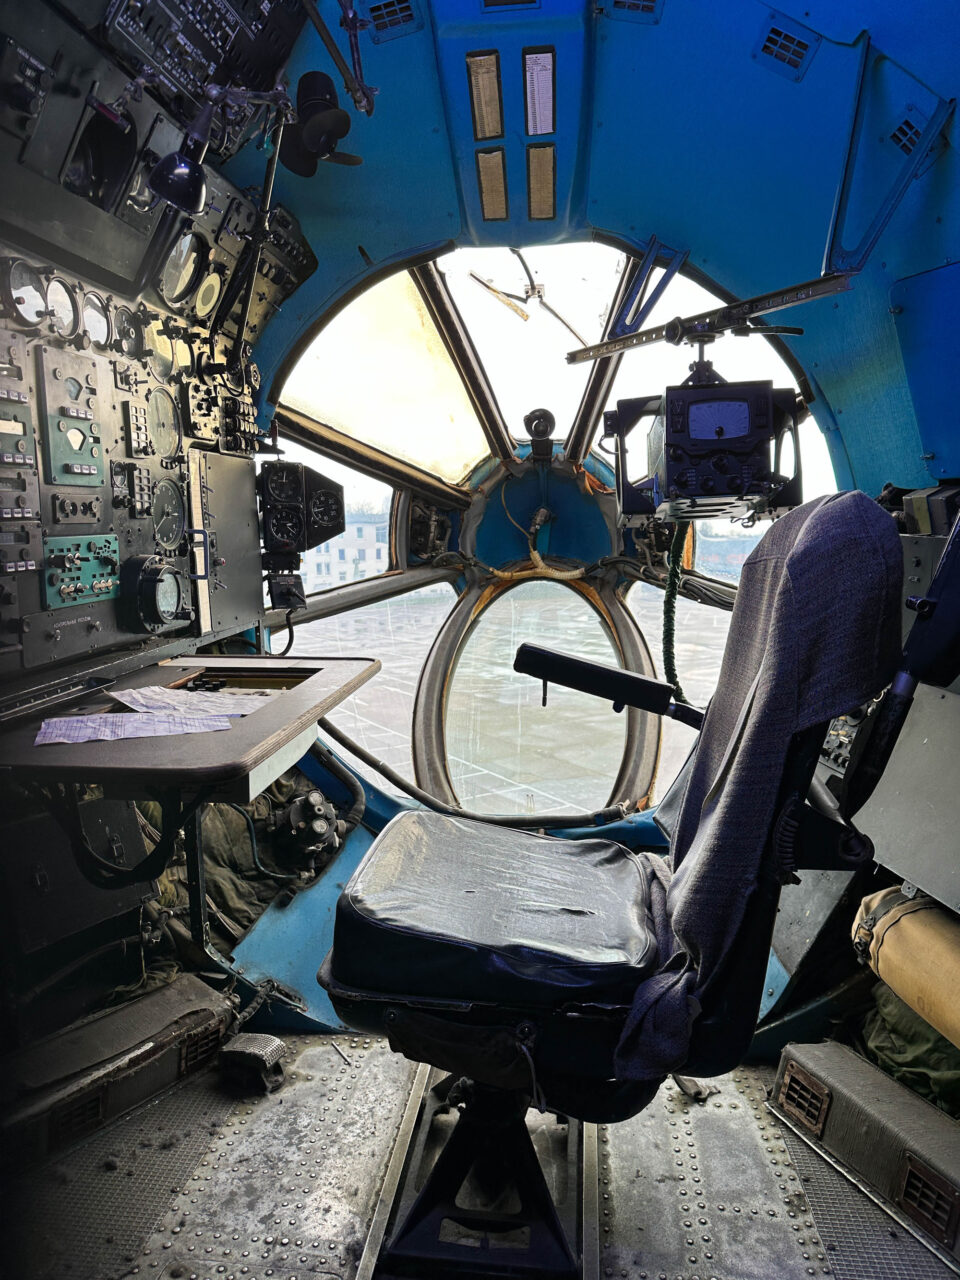 A navigator's seat in one of the exhibited aircraft.